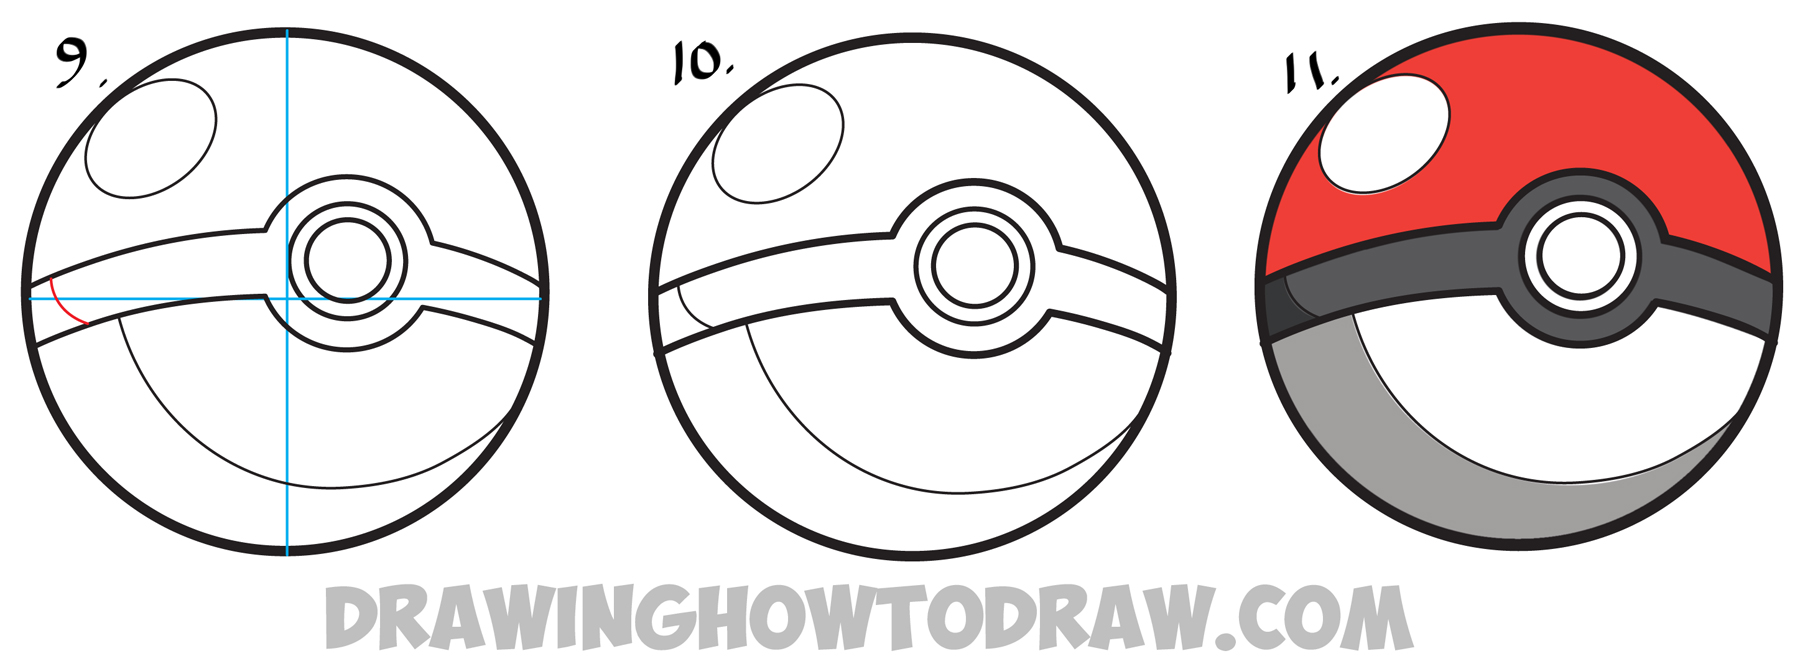 How to Draw a Pokeball from Pokemon - Easy Step by Step Drawing